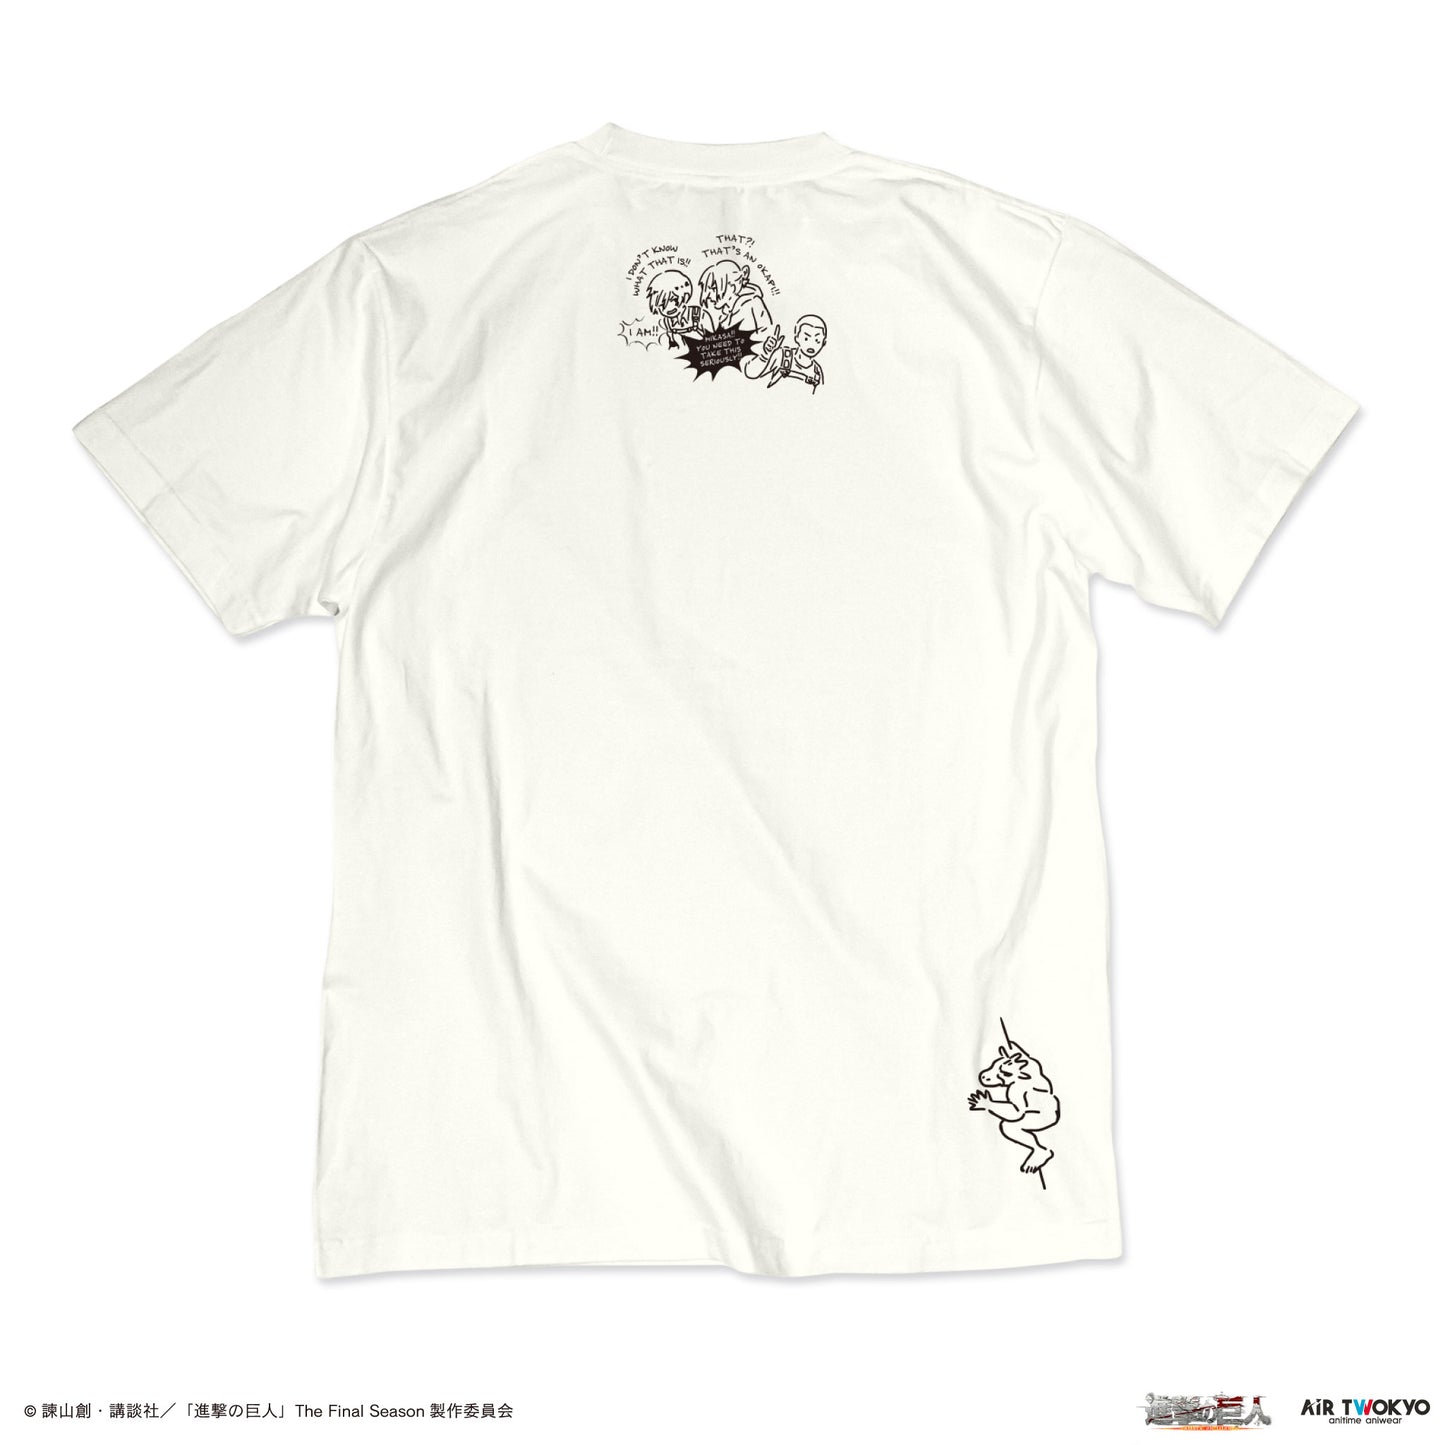 “Attack on Titan” The Final Season THE FINAL CHAPTERS Illustration T-shirt 2 (LET’S GET ARMIN BACK!!)